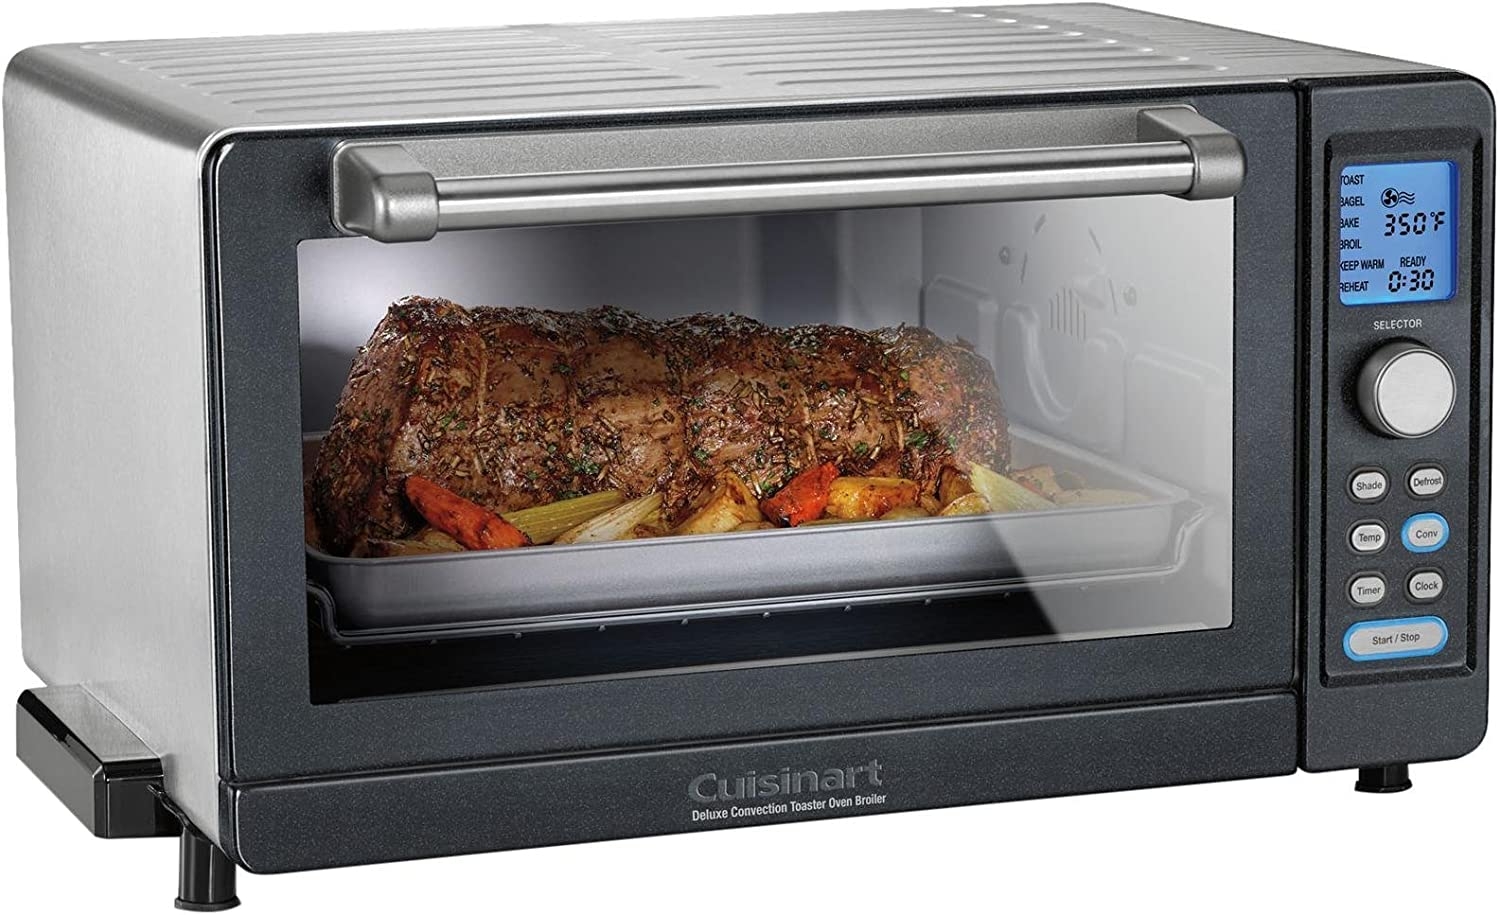 Cuisinart TOB-135N Deluxe Convection Toaster Oven Broiler, Brushed Stainless Import To Shop ×Product customization General